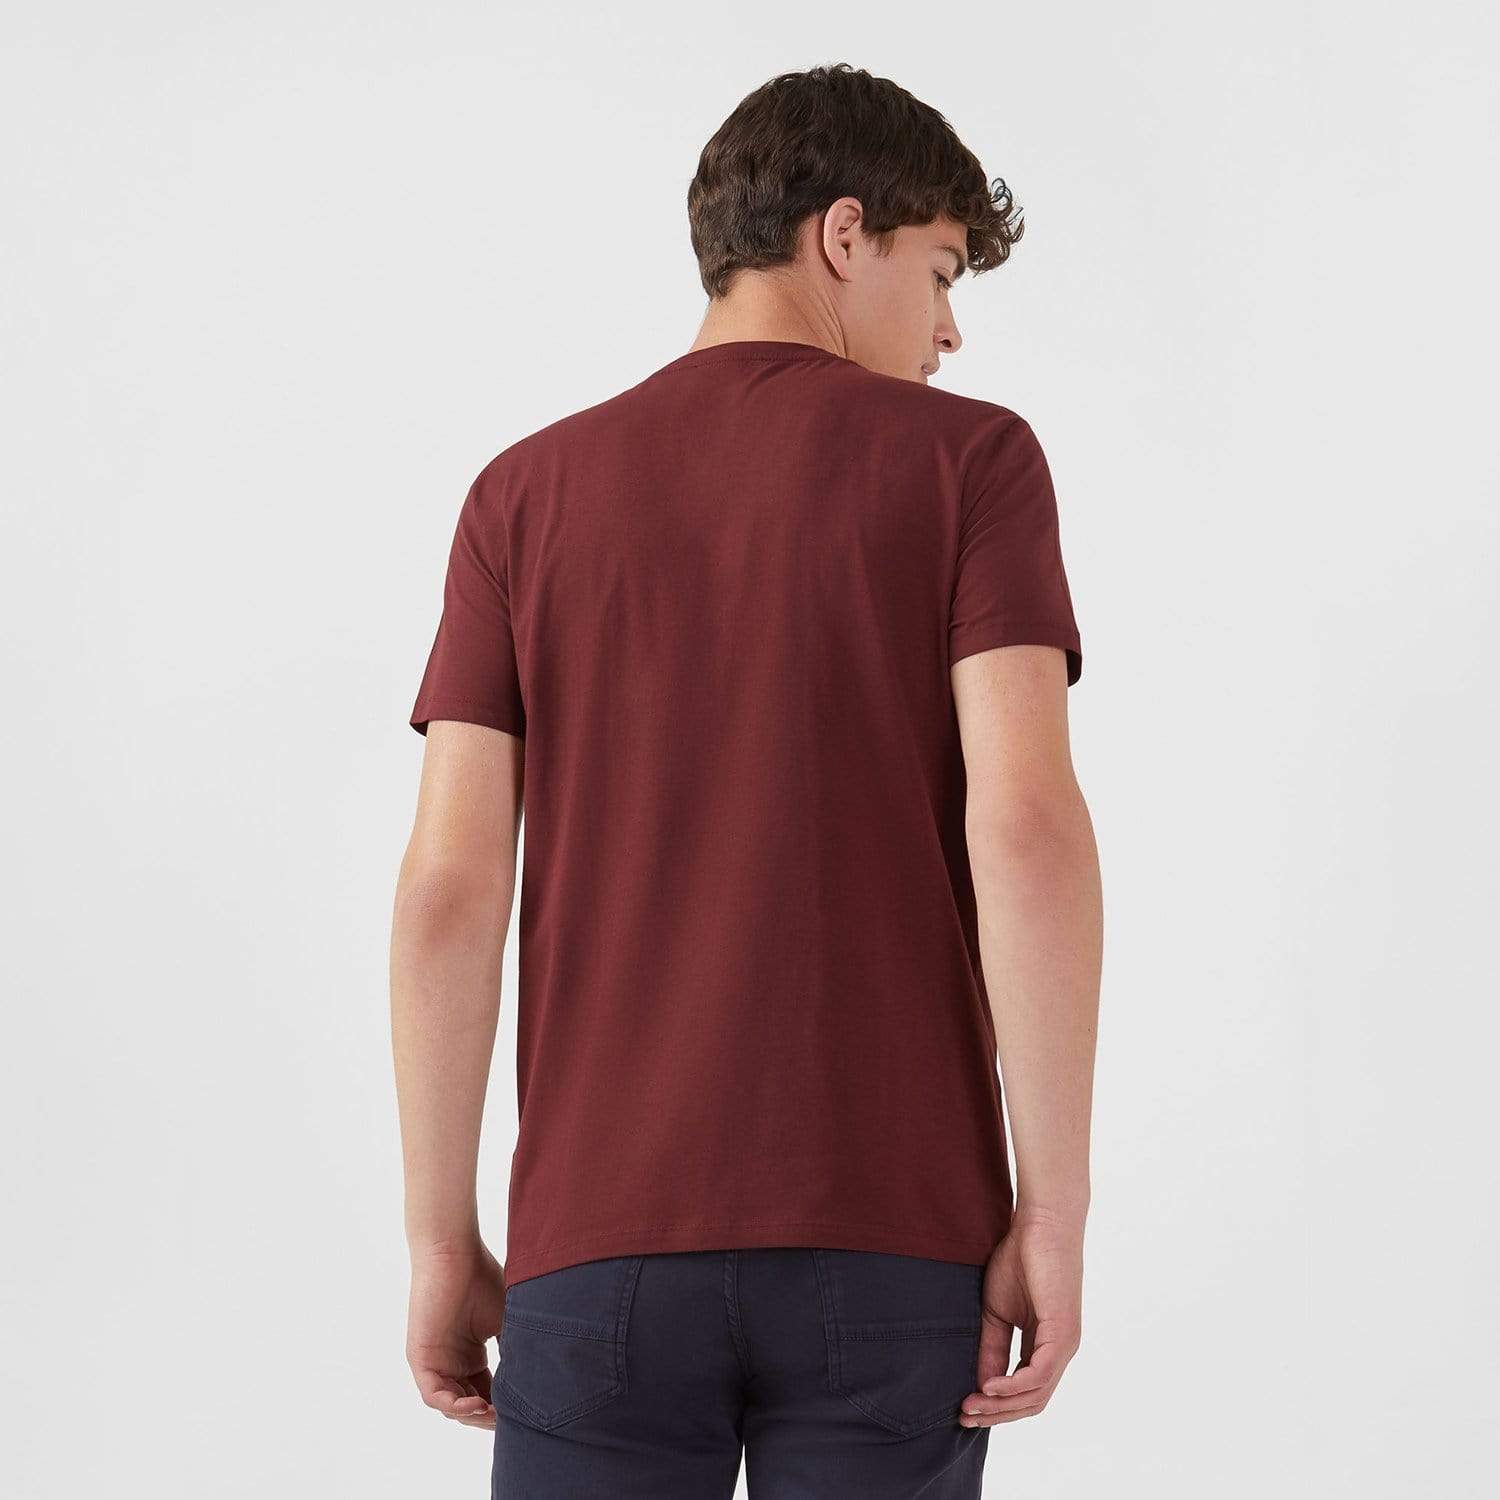 Trussardi Stretch Cotton Jersey Embroidered T-Shirt - Bordeaux - 52T00297-R290 - Jashanmal Home